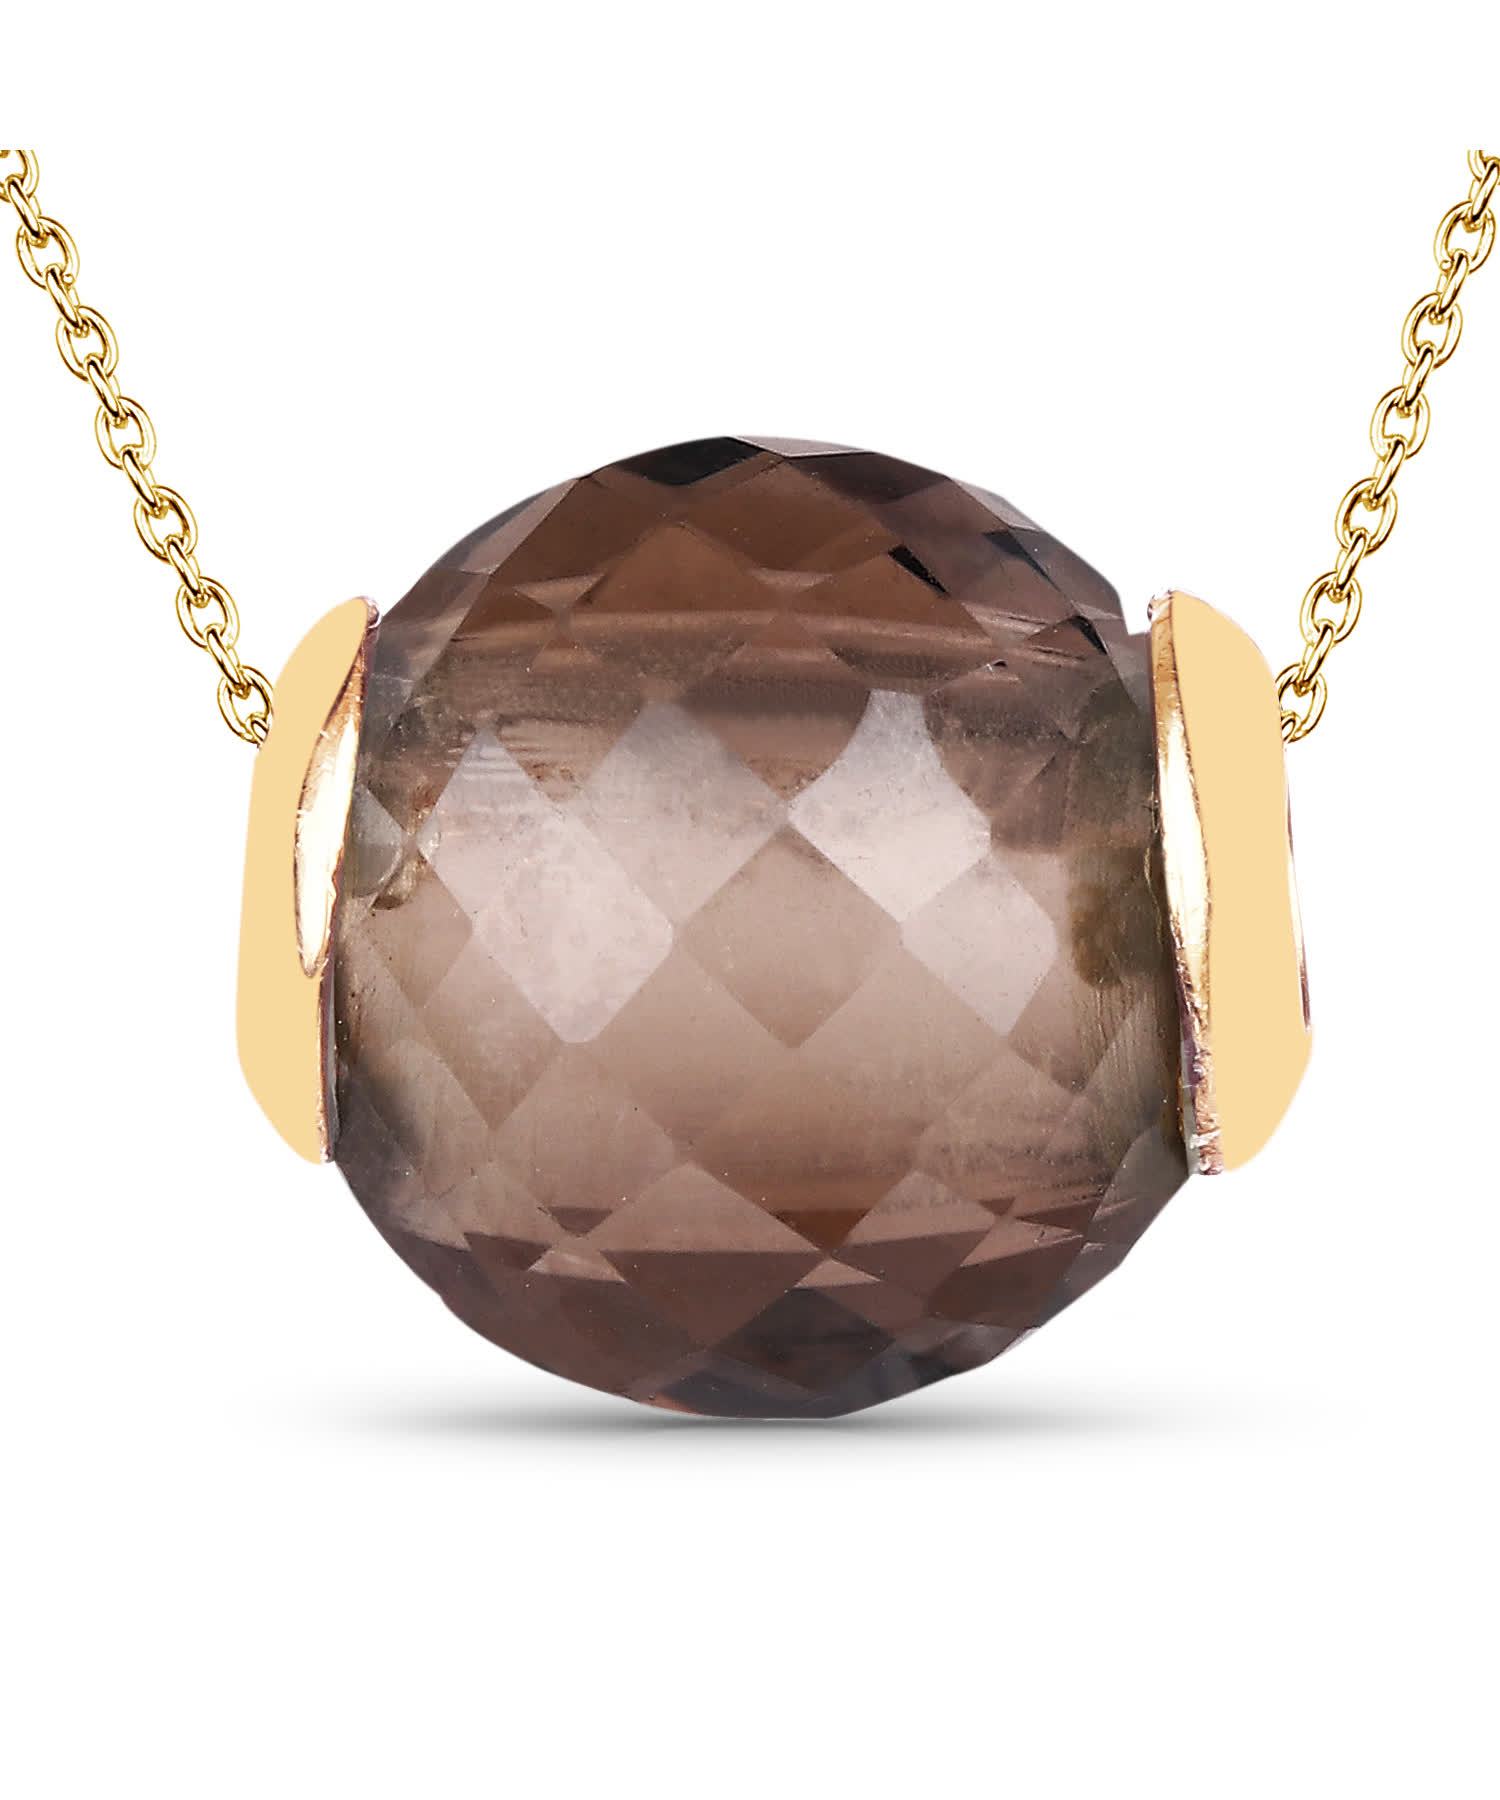 13.01ctw Natural Smoky Quartz 14k Gold Plated 925 Sterling Silver Pendant With Chain View 1